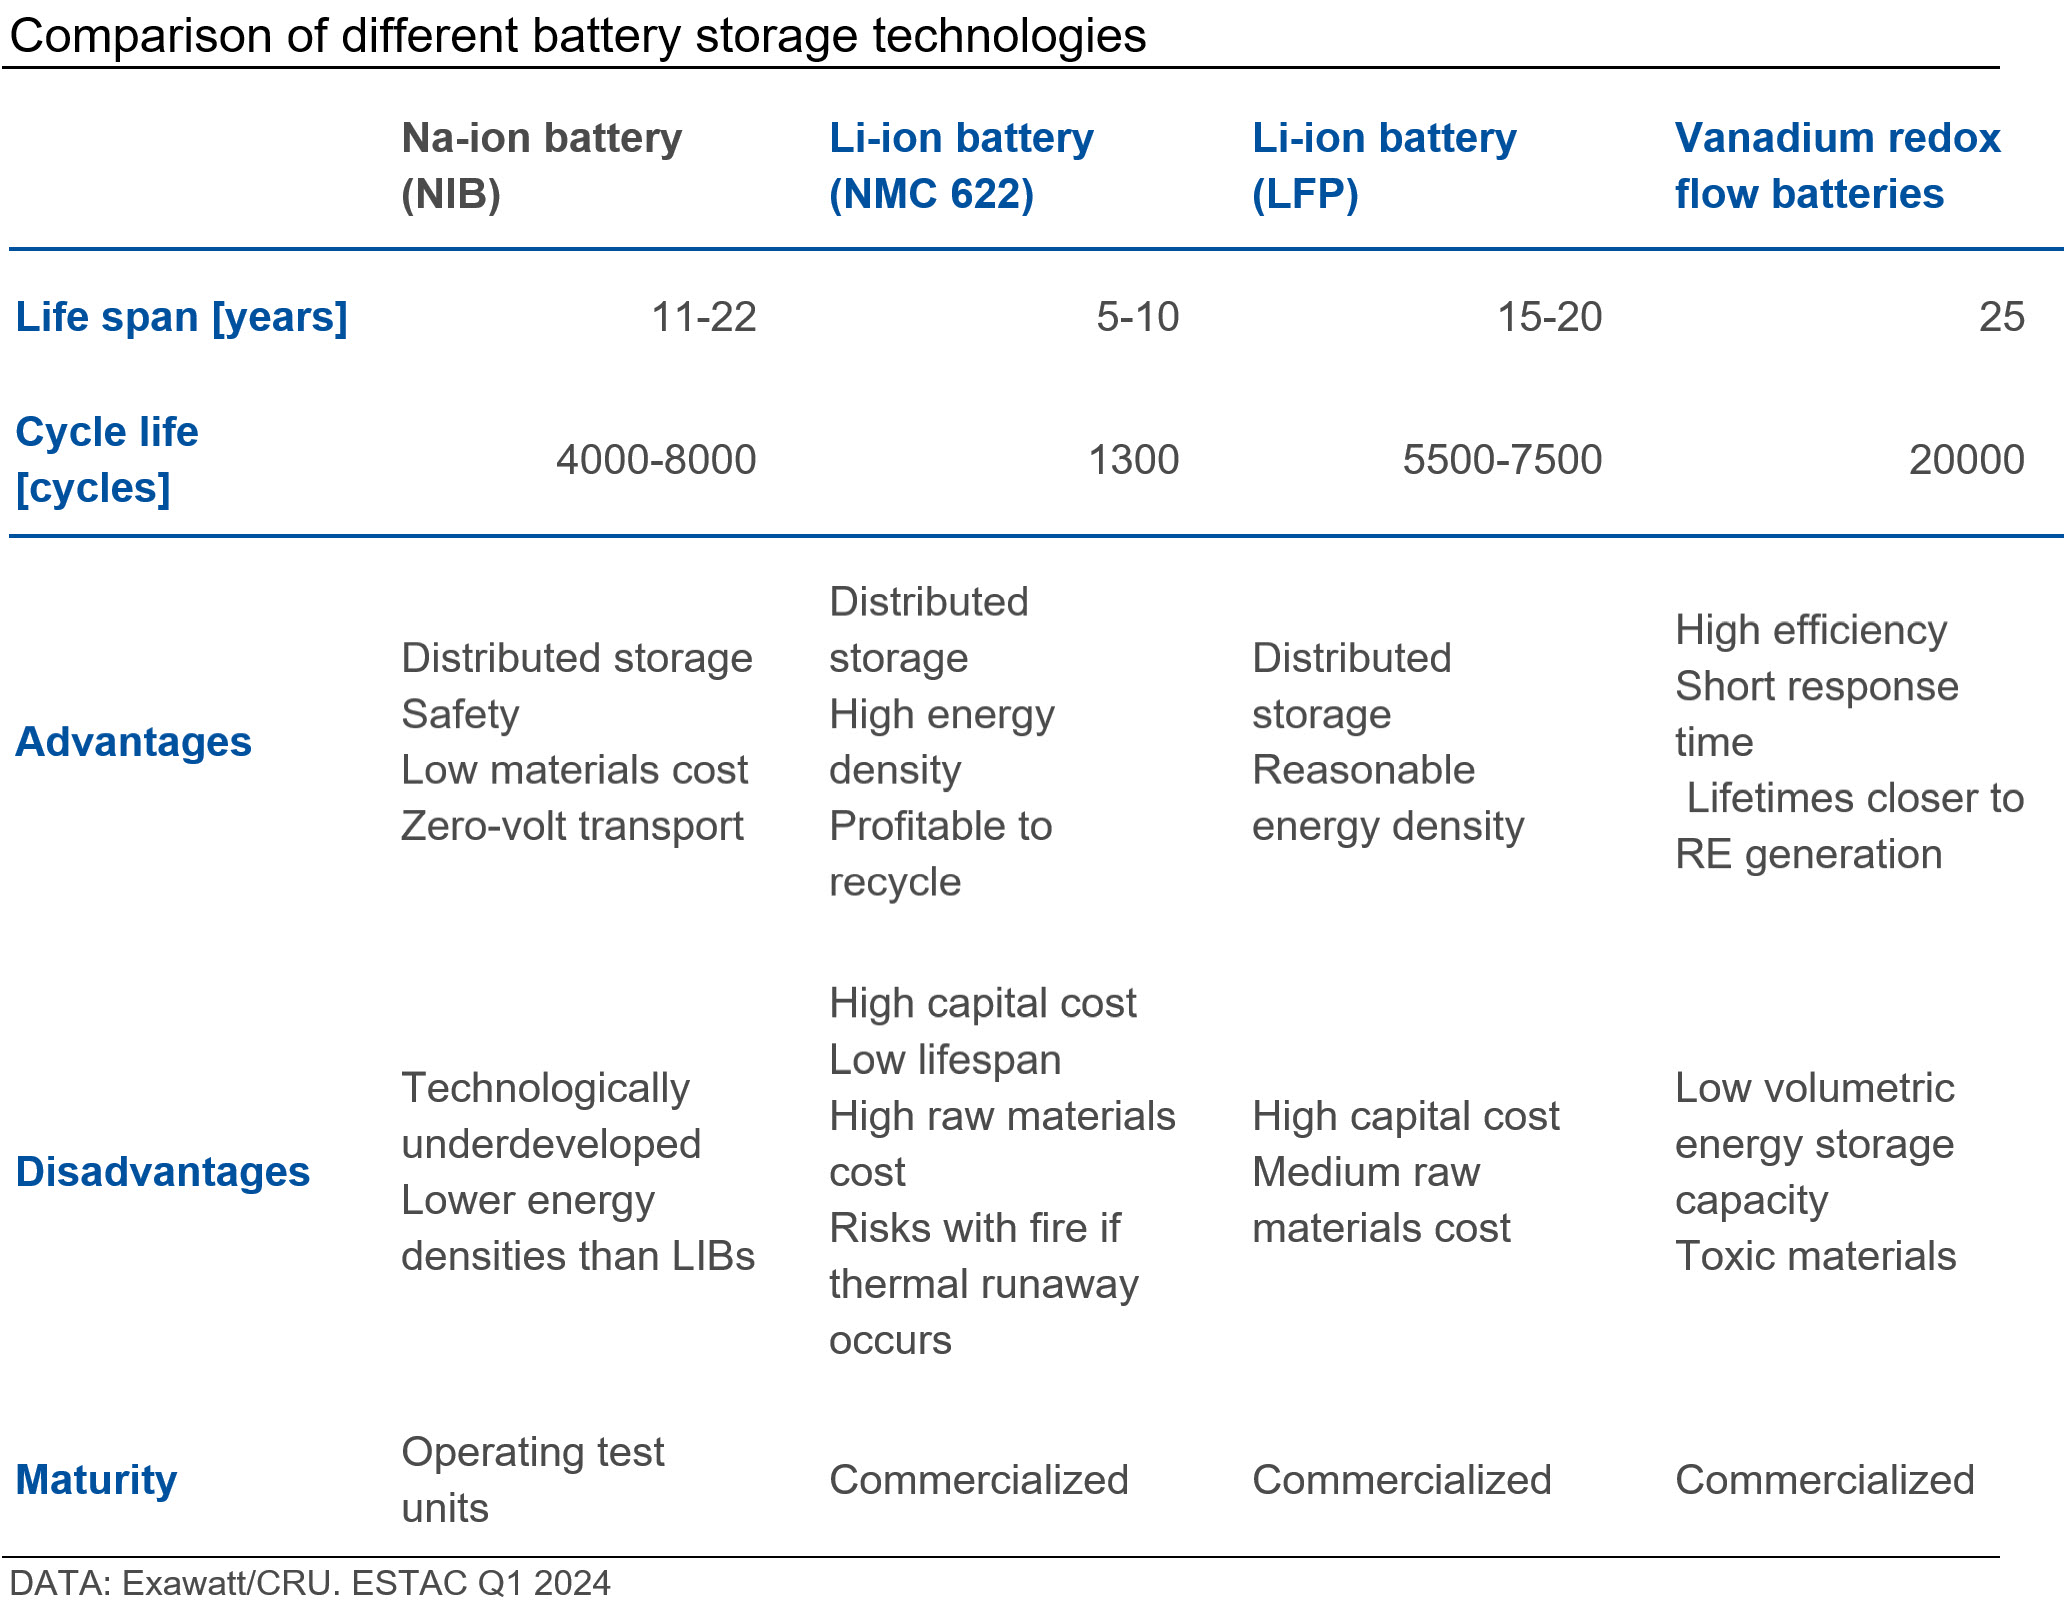 Comparison of different battery storage technologies